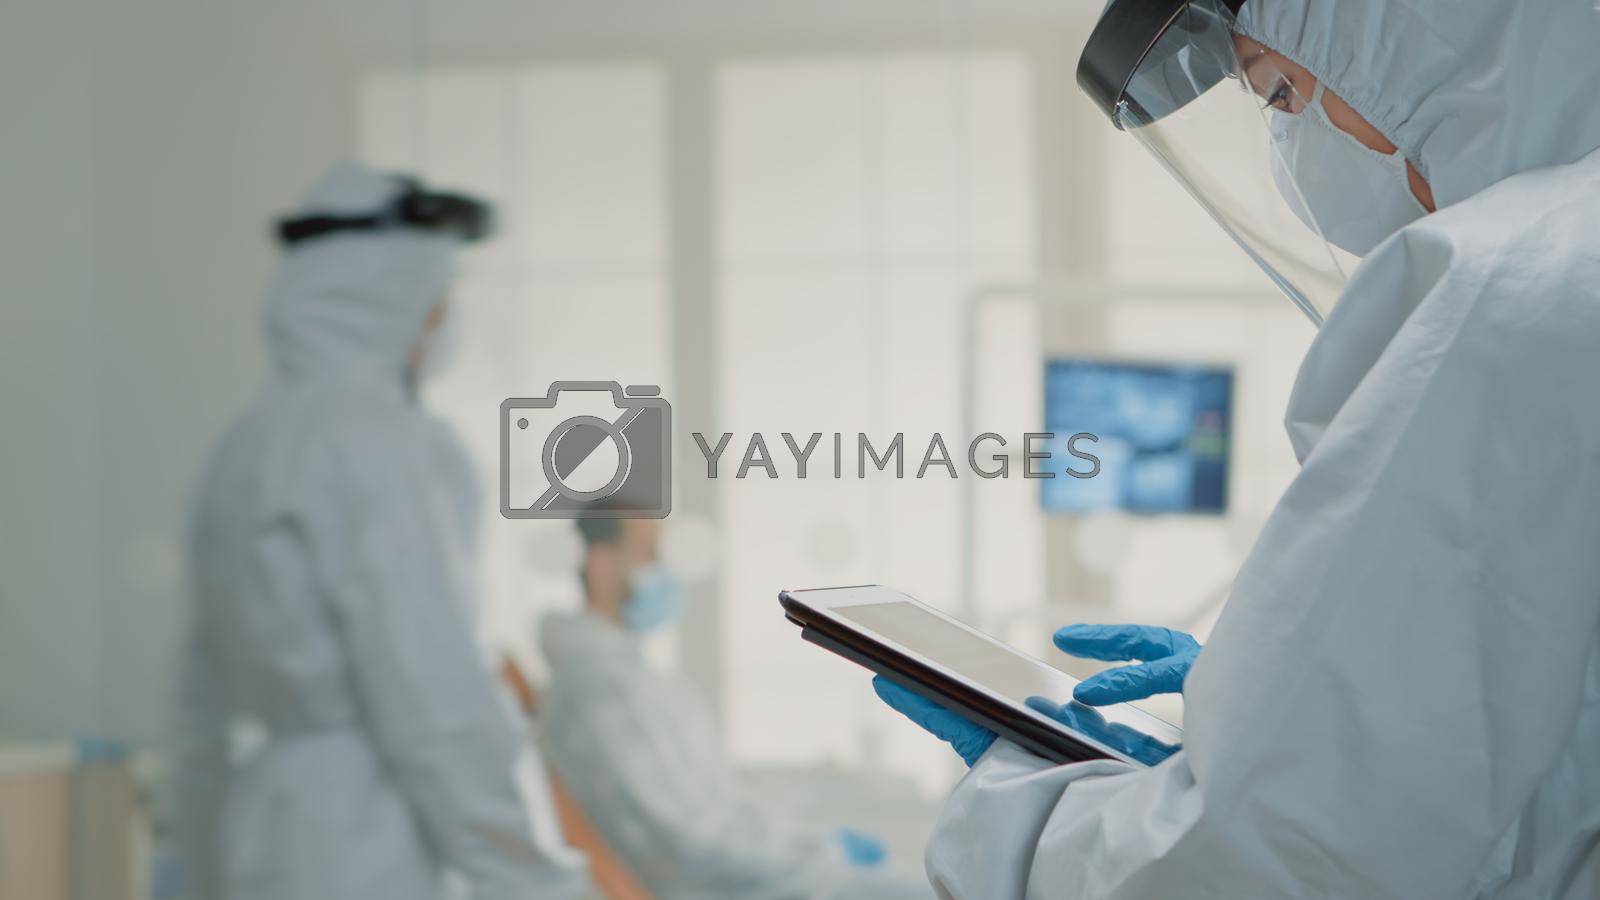 Dental assistant examining teeth x ray on digital device at oral healthcare clinic while dentist consulting patient in background. Orthodontist team working with technology for modern hygiene